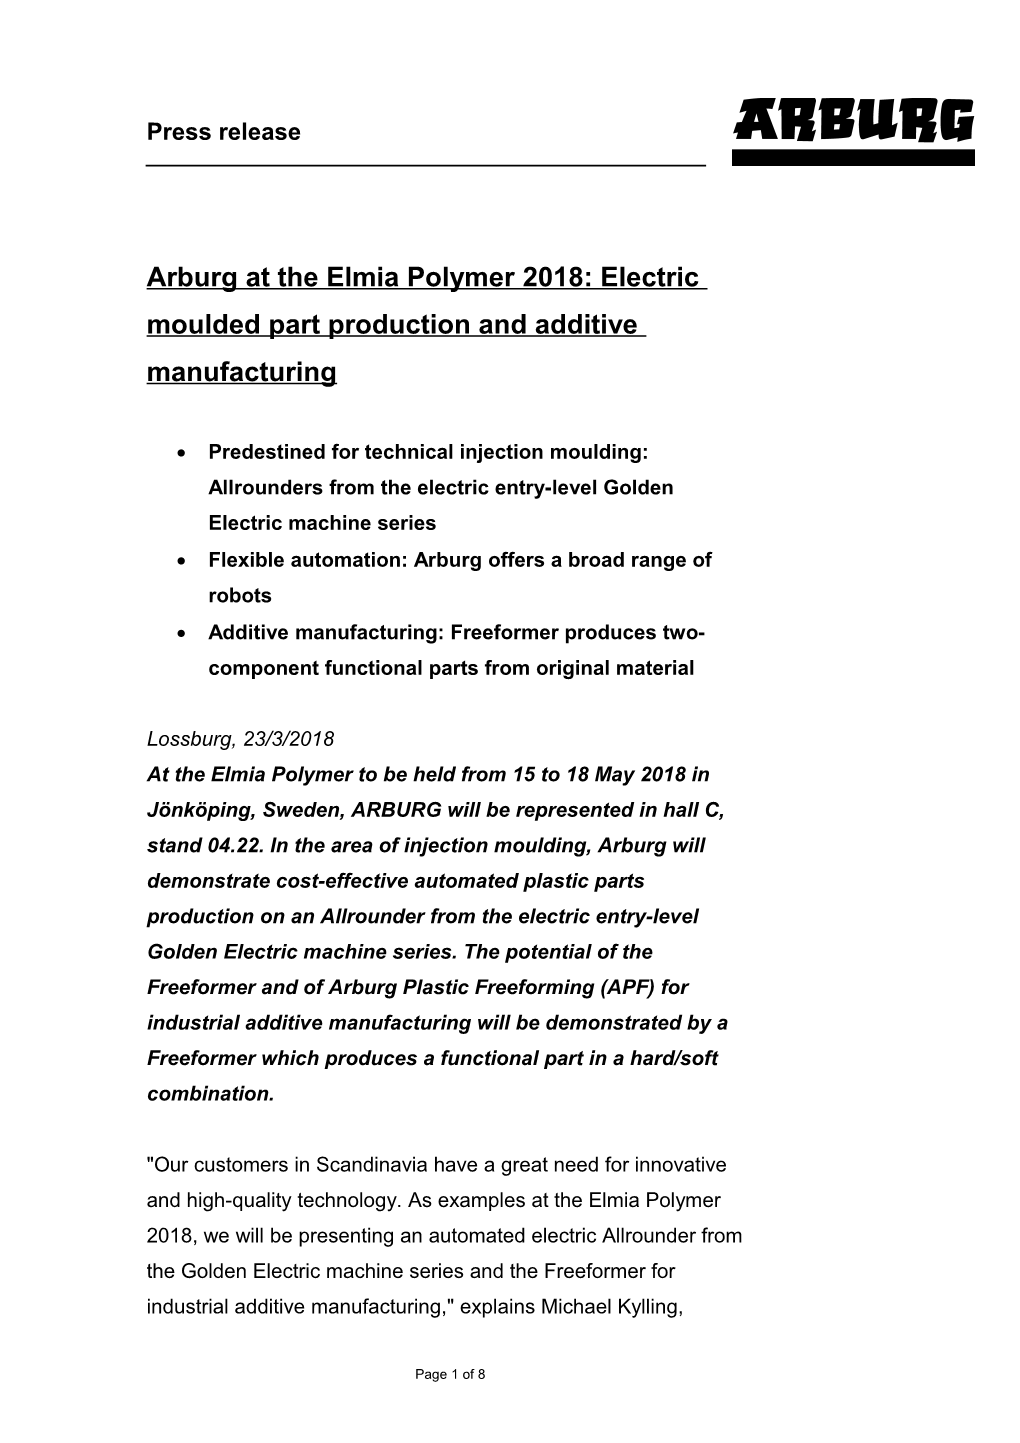 Arburg at the Elmia Polymer 2018: Electric Moulded Part Production and Additive Manufacturing